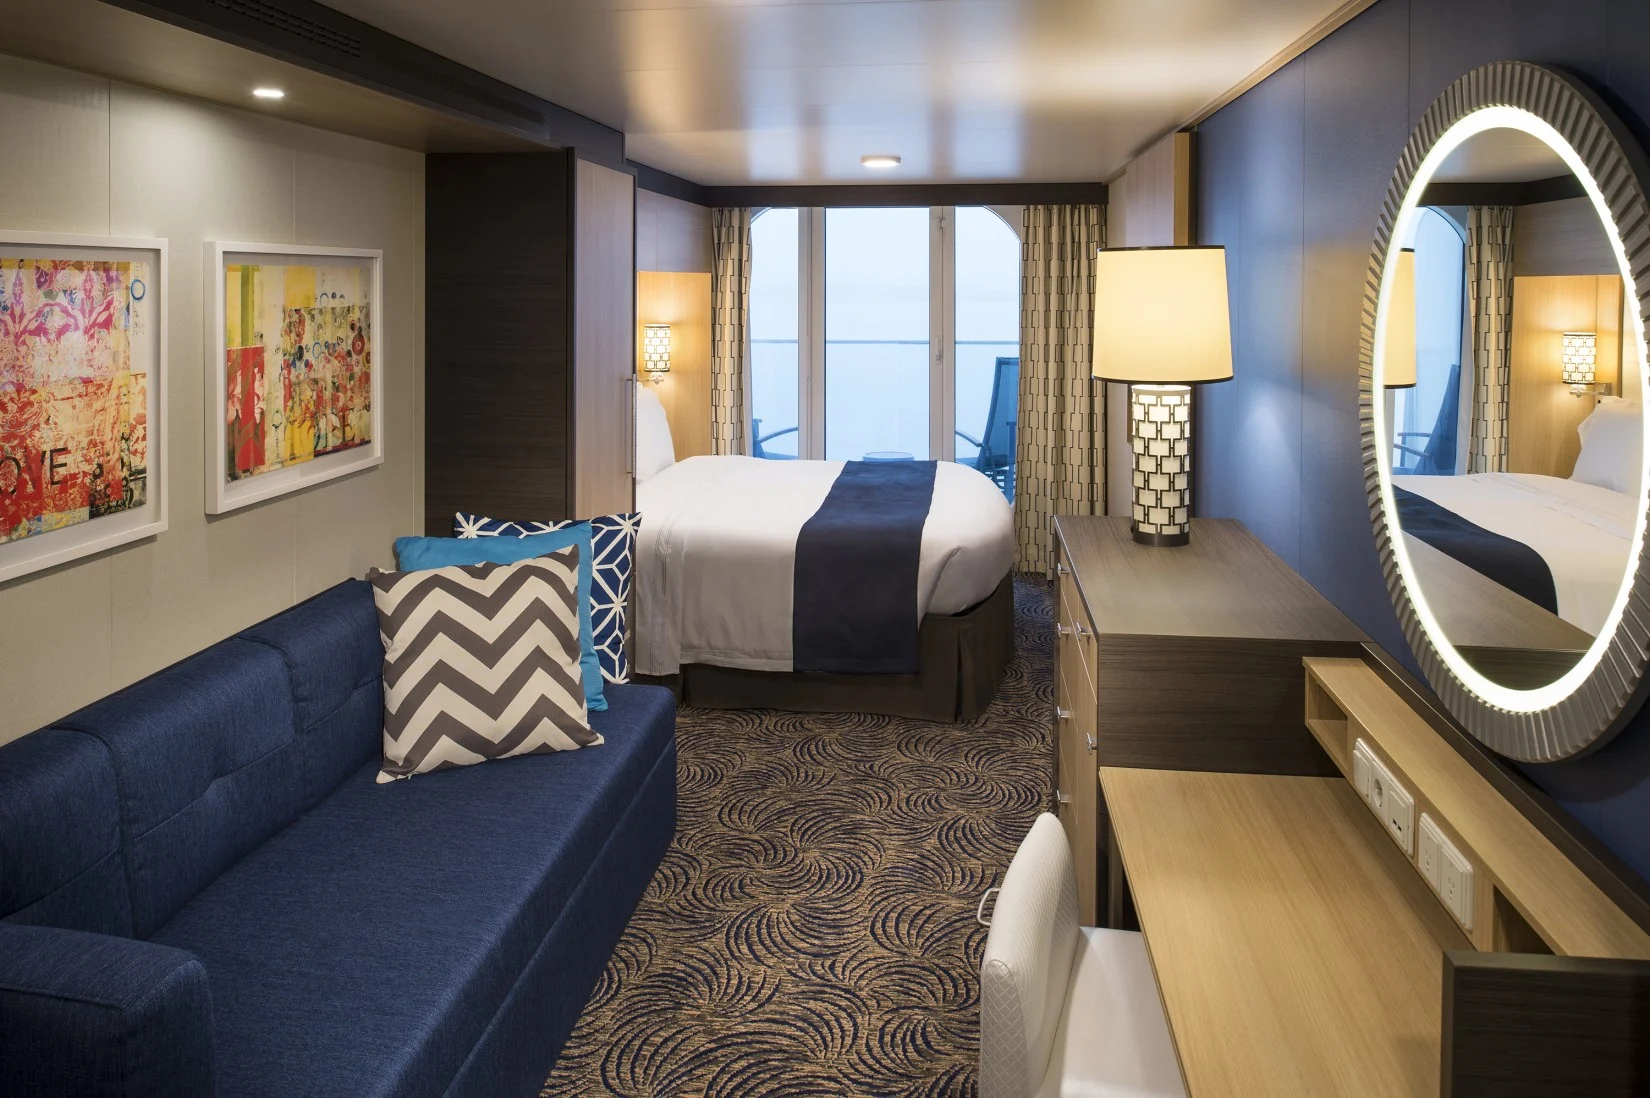 Image of Oceanview Balcony Cabin, sourced from: Royal Caribbean International https://touristwire.com/wp-content/uploads/2023/05/RCI_QN-OceanviewBalcF-1650x1098.jpg